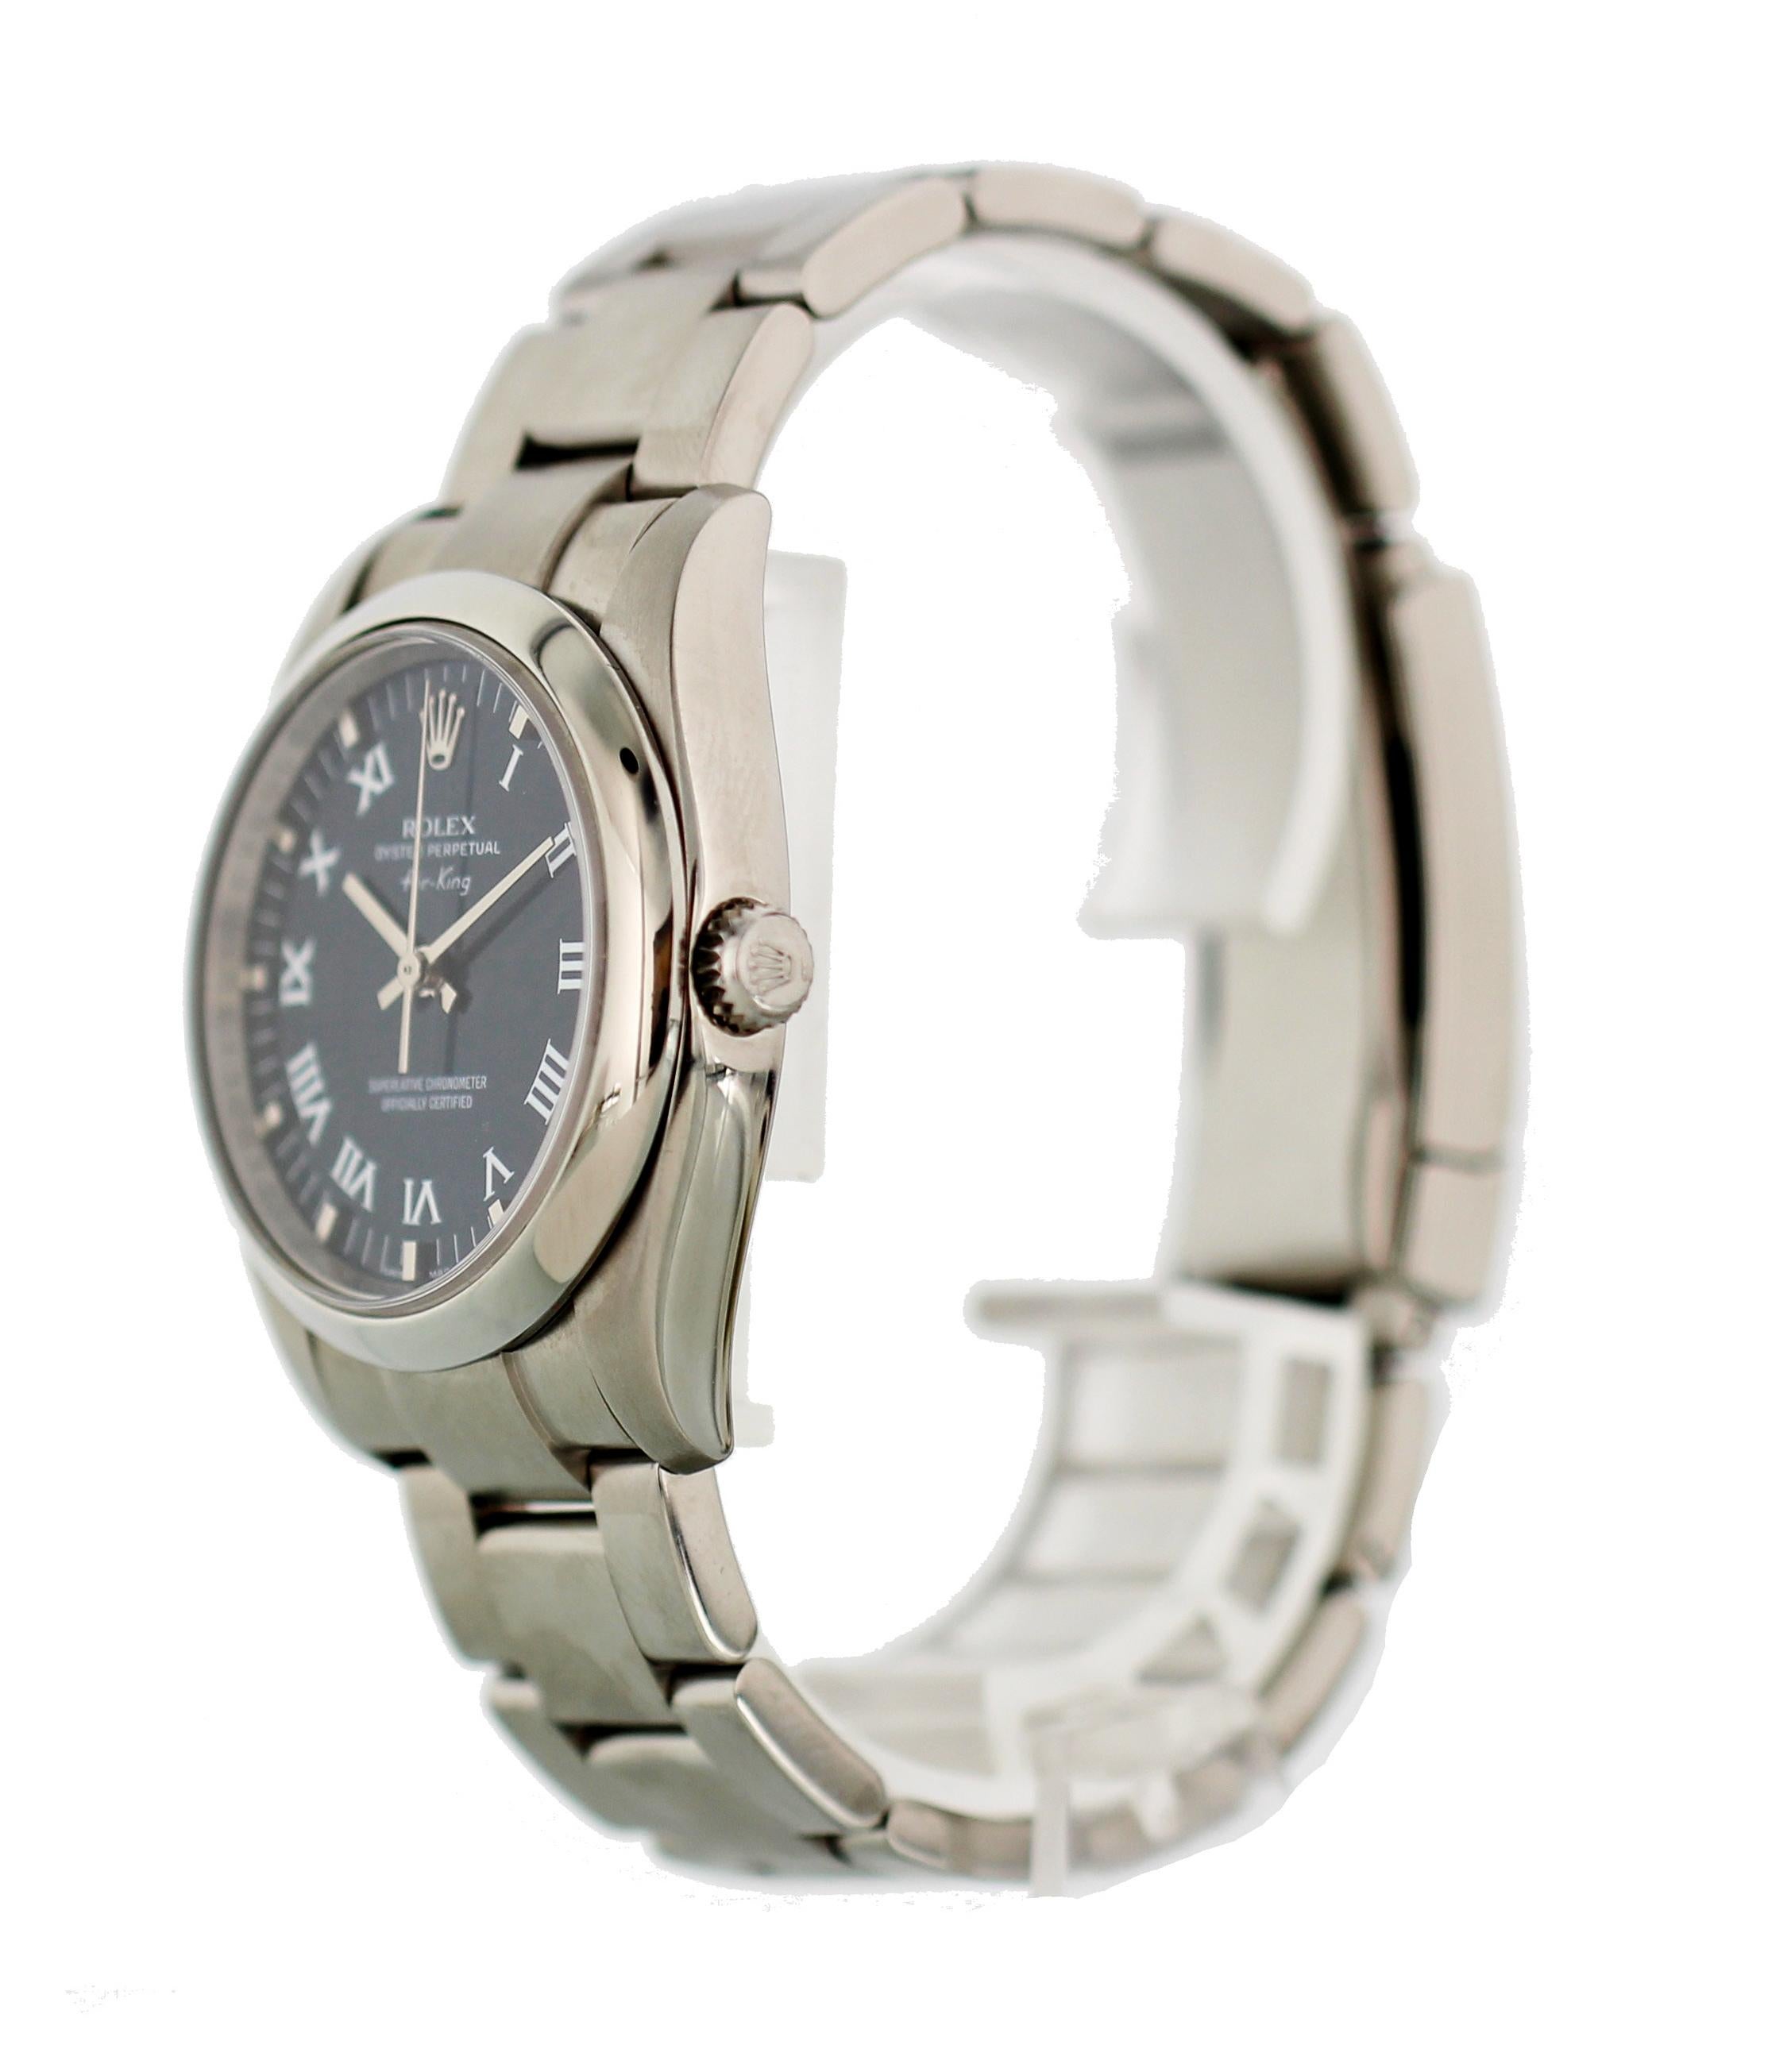 Rolex Oyster Perpetual Air-King Precision 114200 In Excellent Condition For Sale In New York, NY